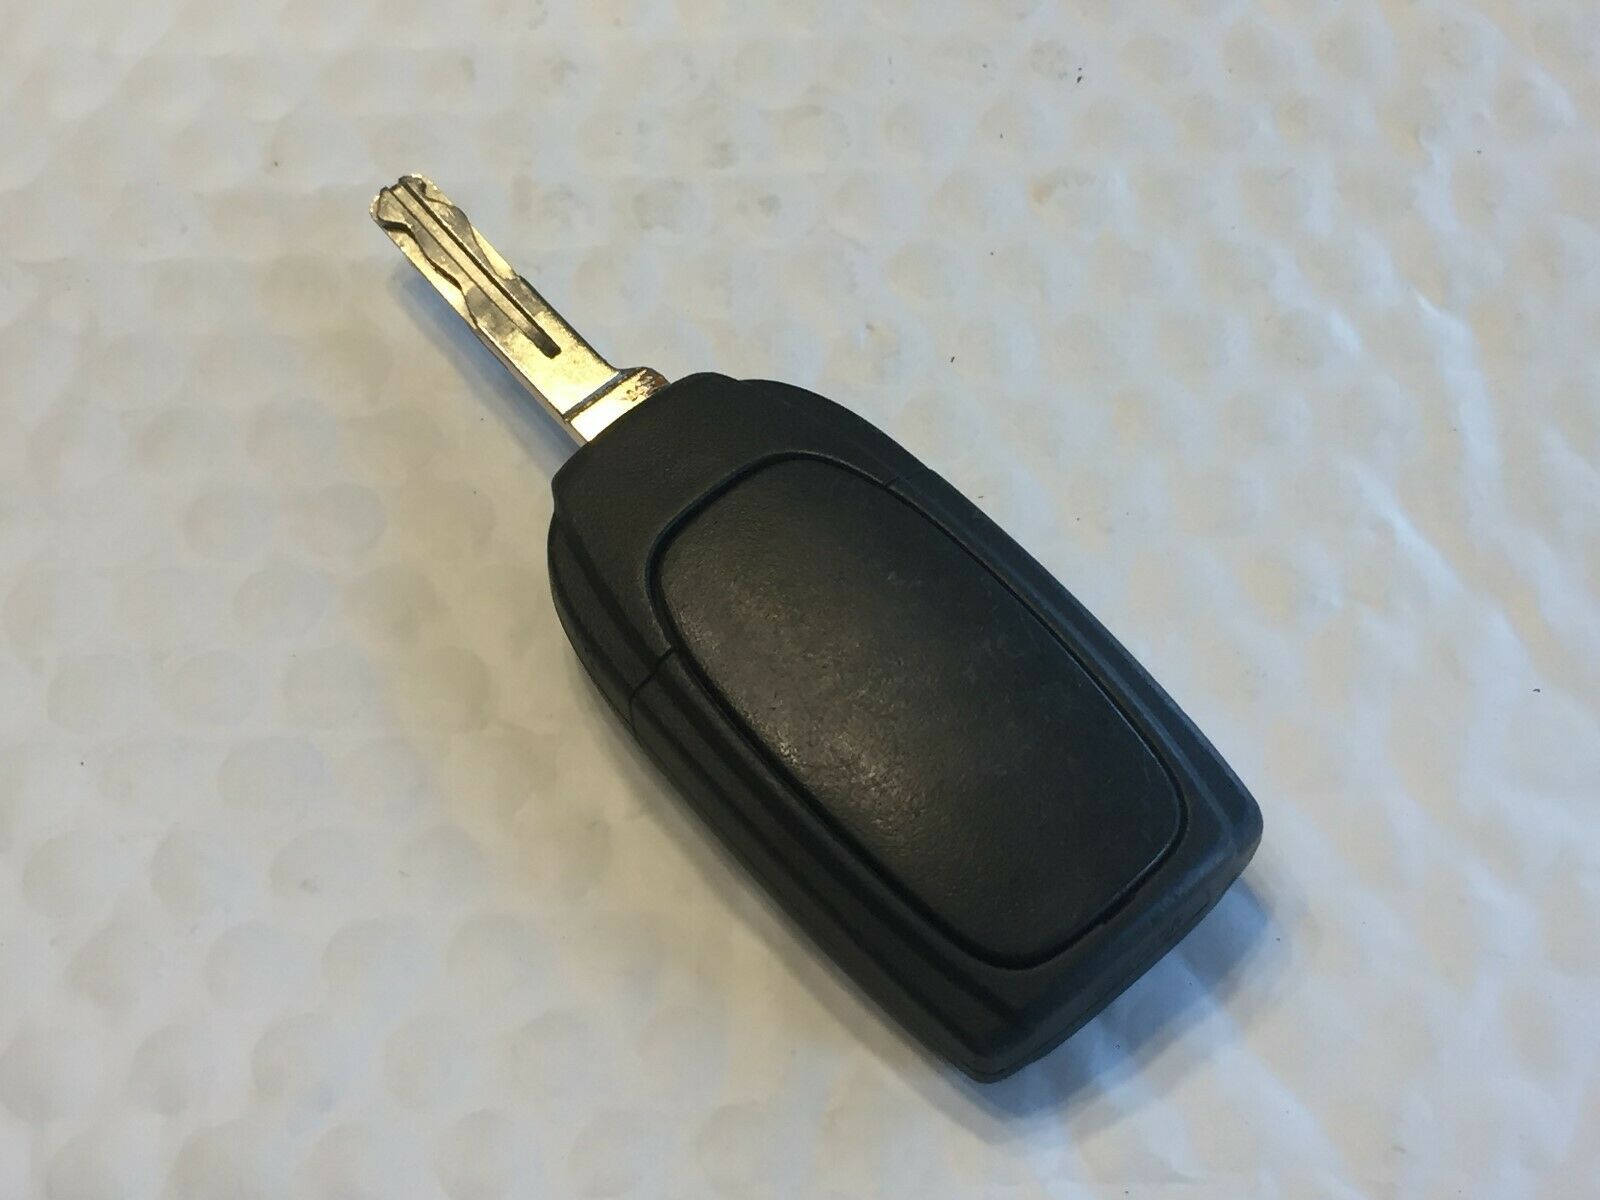 2004-2014 Xc90 Volvo Keyless Entry Remote Fob Lqnp2t-Apu 5 Buttons - Oemusedautoparts1.com